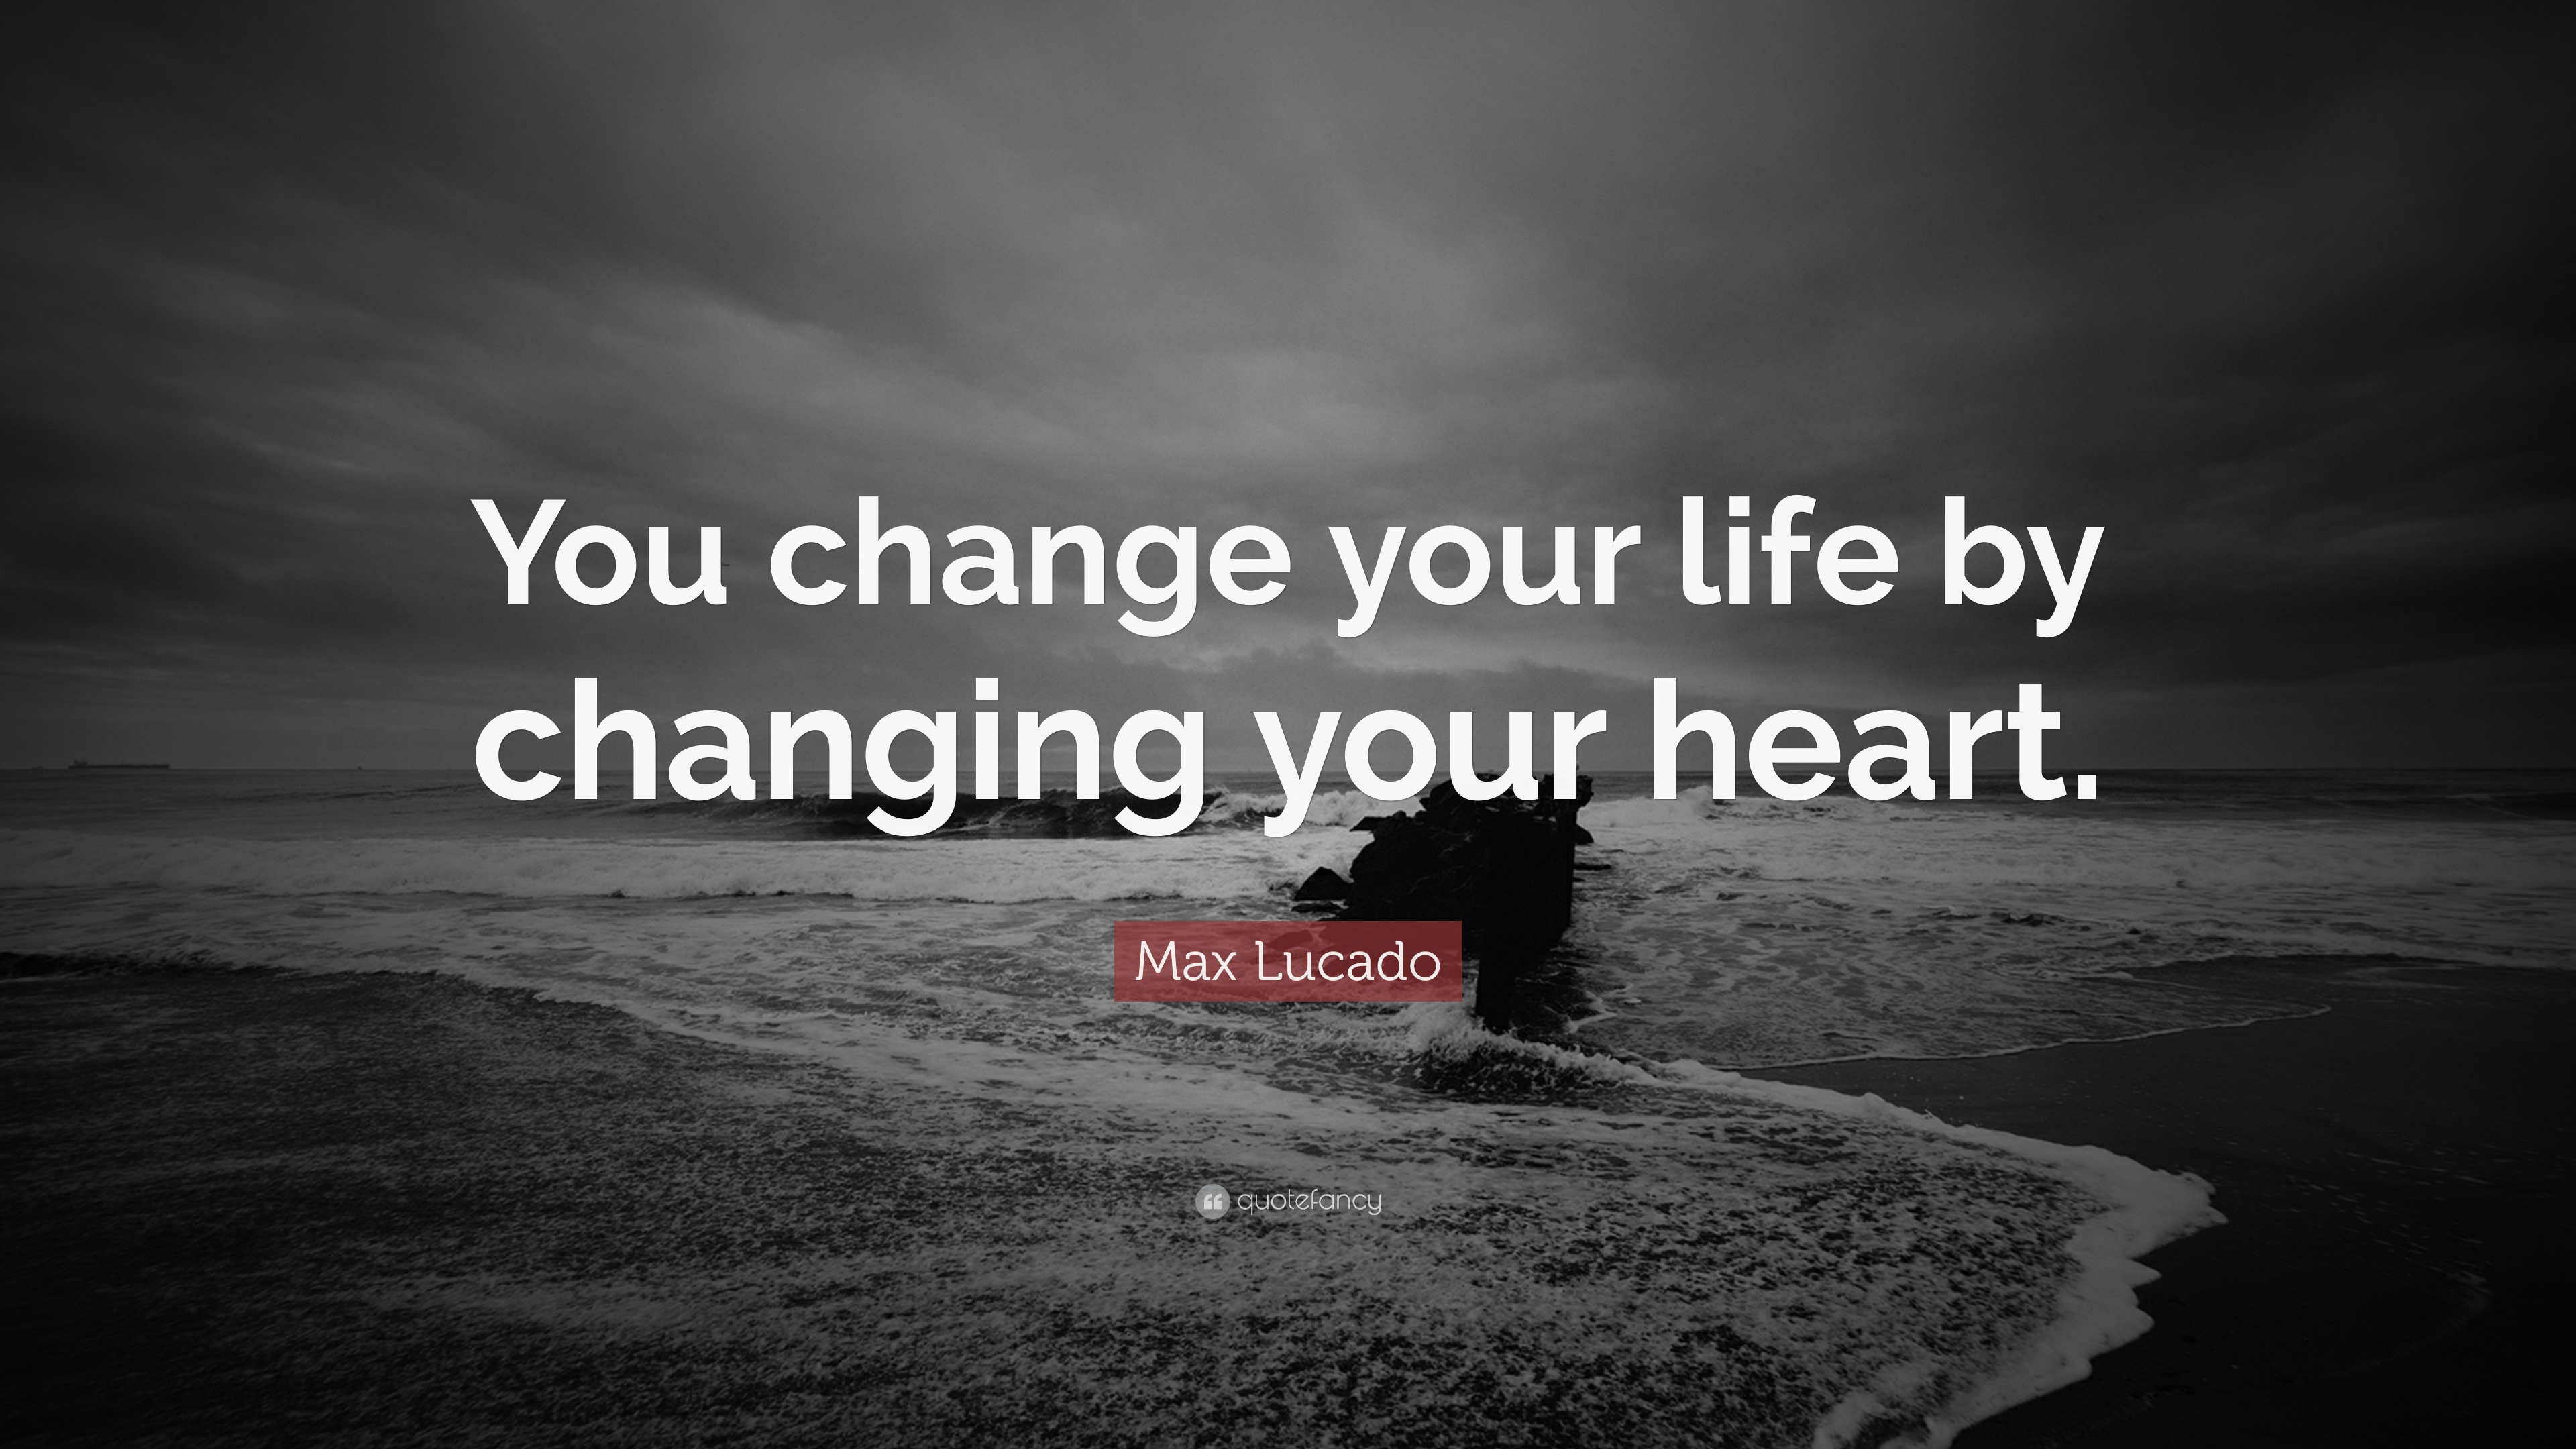 You change your life by changing your heart. Max Lucado